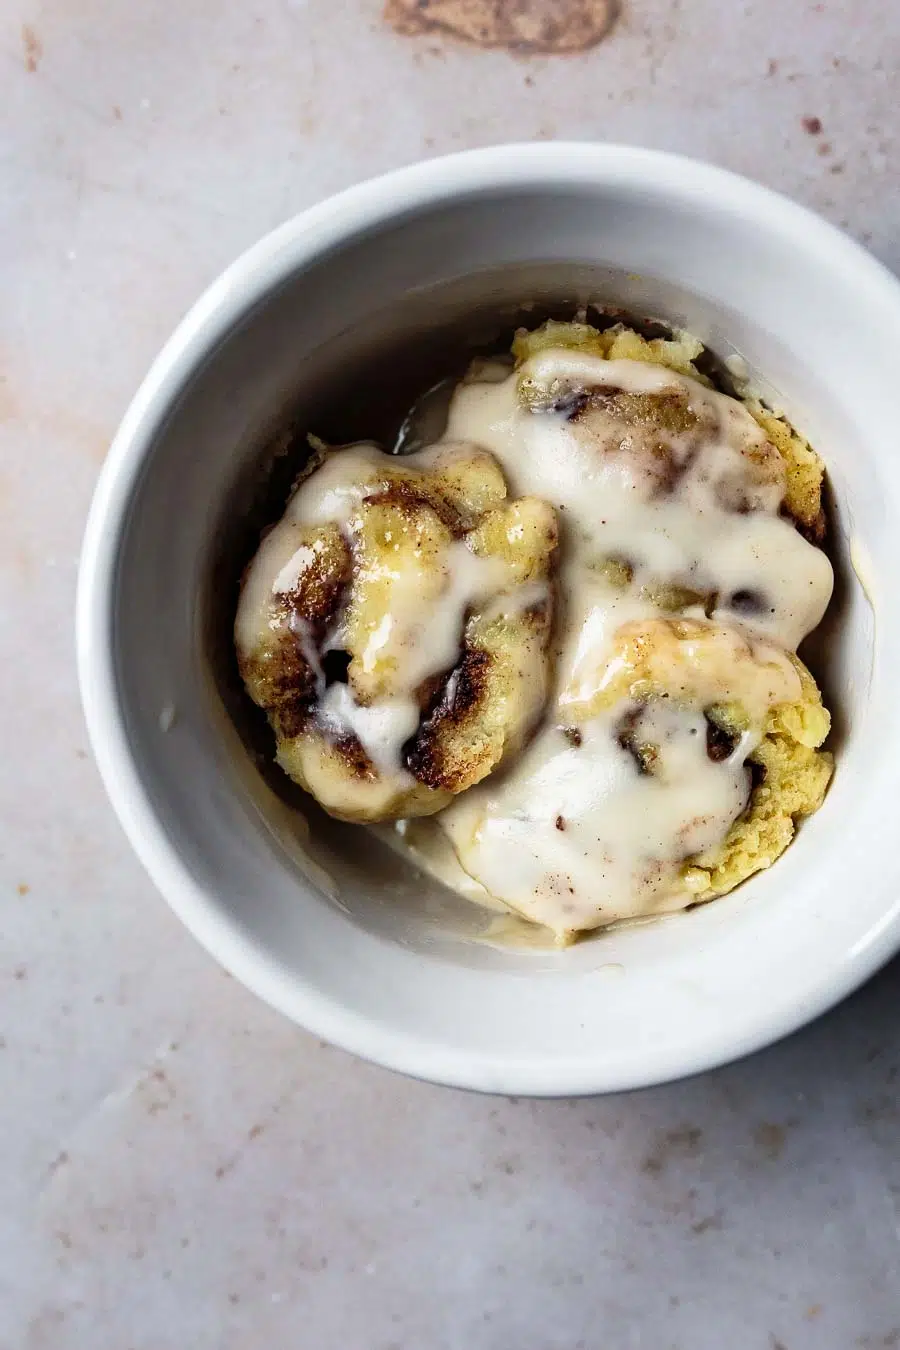 3 small pieces of this cinnamon roll sitting in a white bowl on a light colored counter top. They have been topped with a cream colored date sauce.